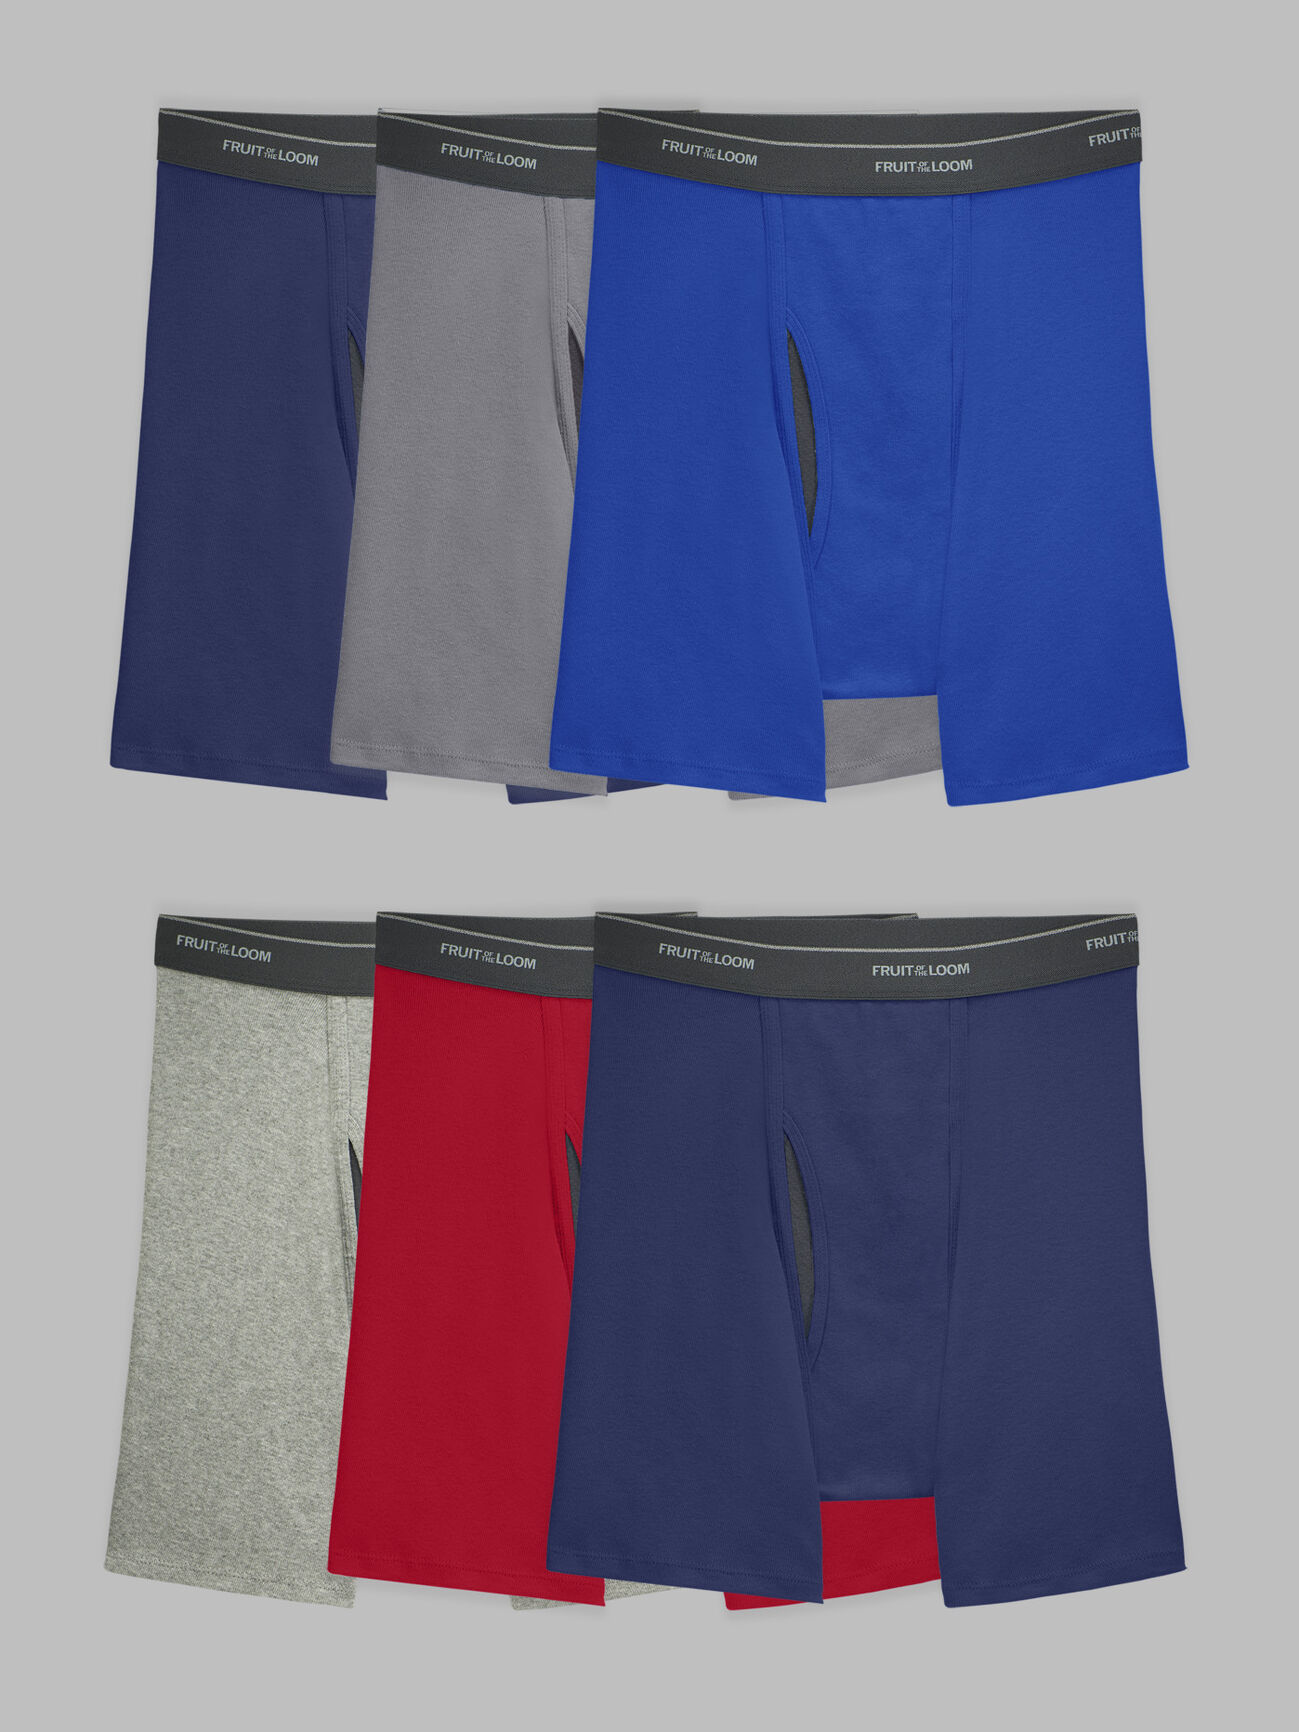 Fruit of the Loom, Underwear & Socks, Fruit Of The Loom 6 Pk Boxer Briefs  Size 3xl 485 New Moisture Wicking Mesh Fly